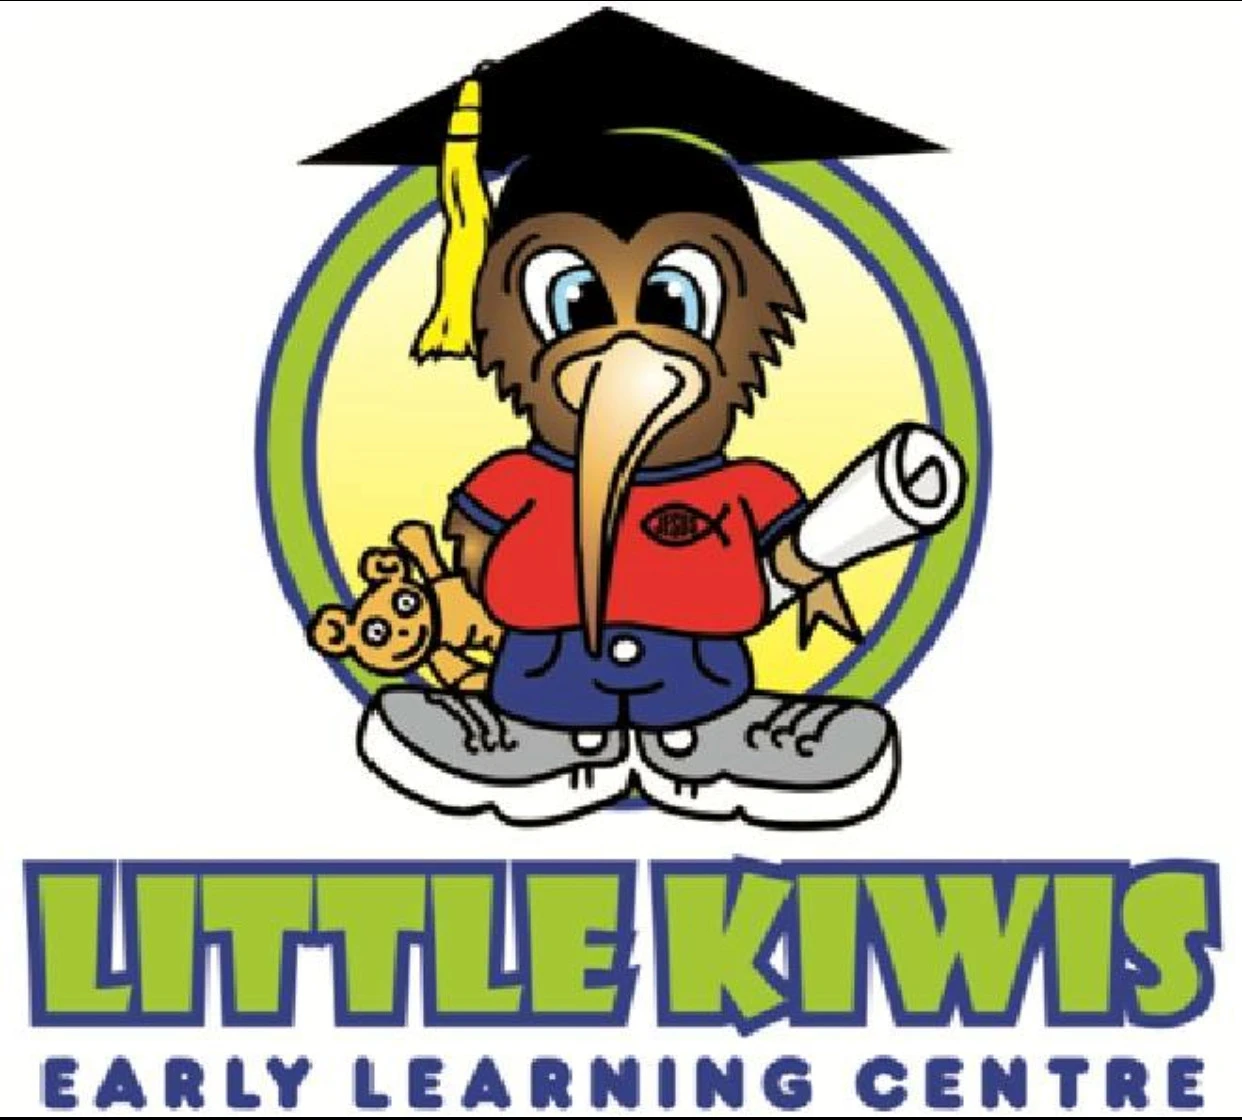 Little Kiwis Early Learning Centre